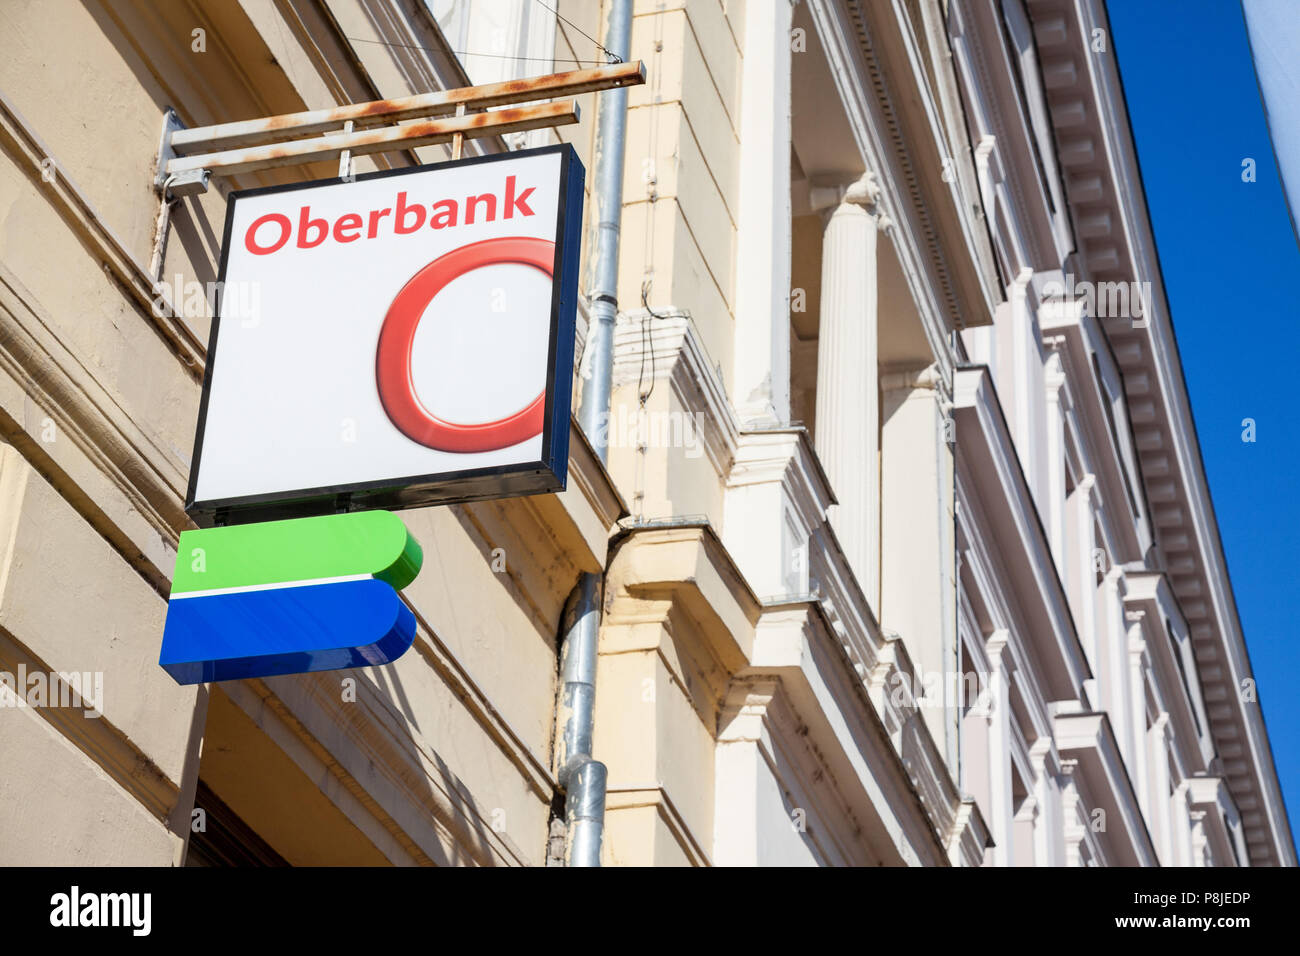 SZEGED, HUNGARY, JULY 3, 2018: Oberbank logo on their main bank in the center of Szeged. Oberbank is an Austrian bank,  investing in Central Europe, p Stock Photo